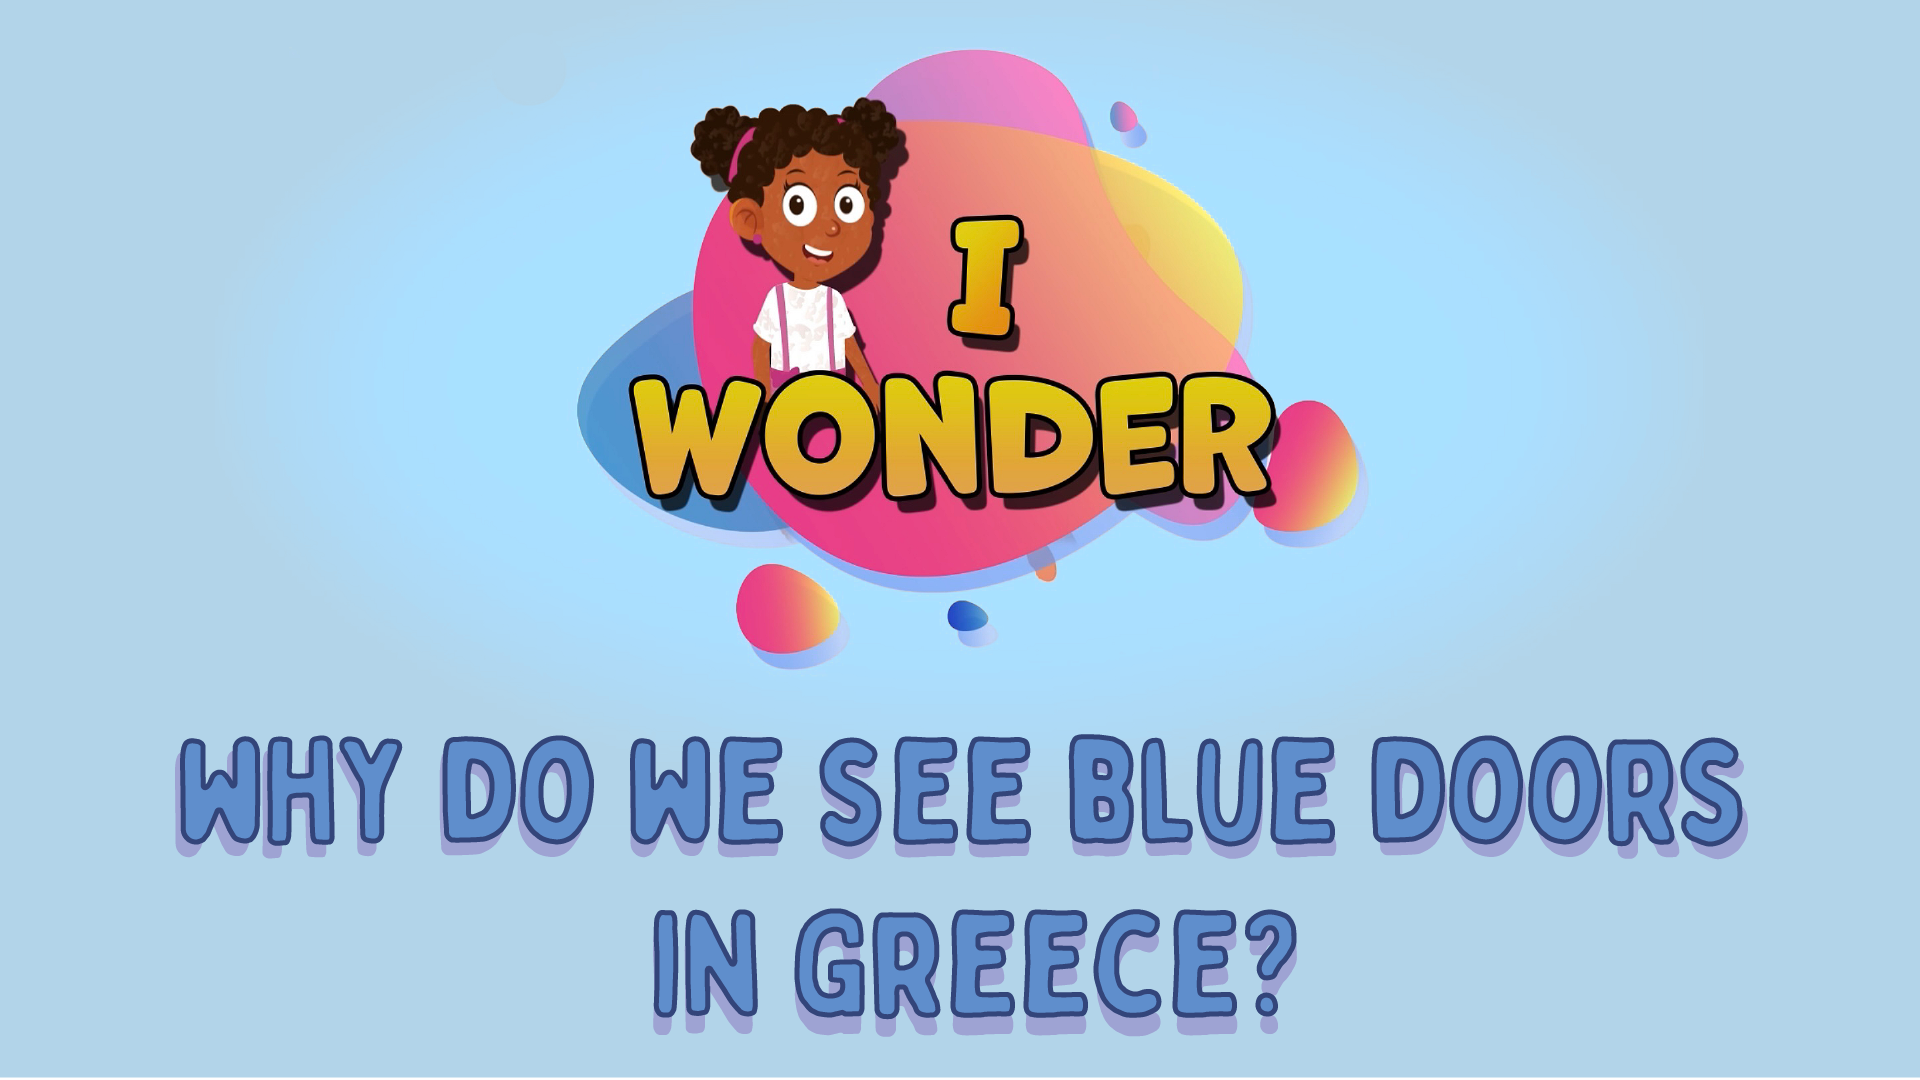 Why Do We See Blue Doors In Greece?